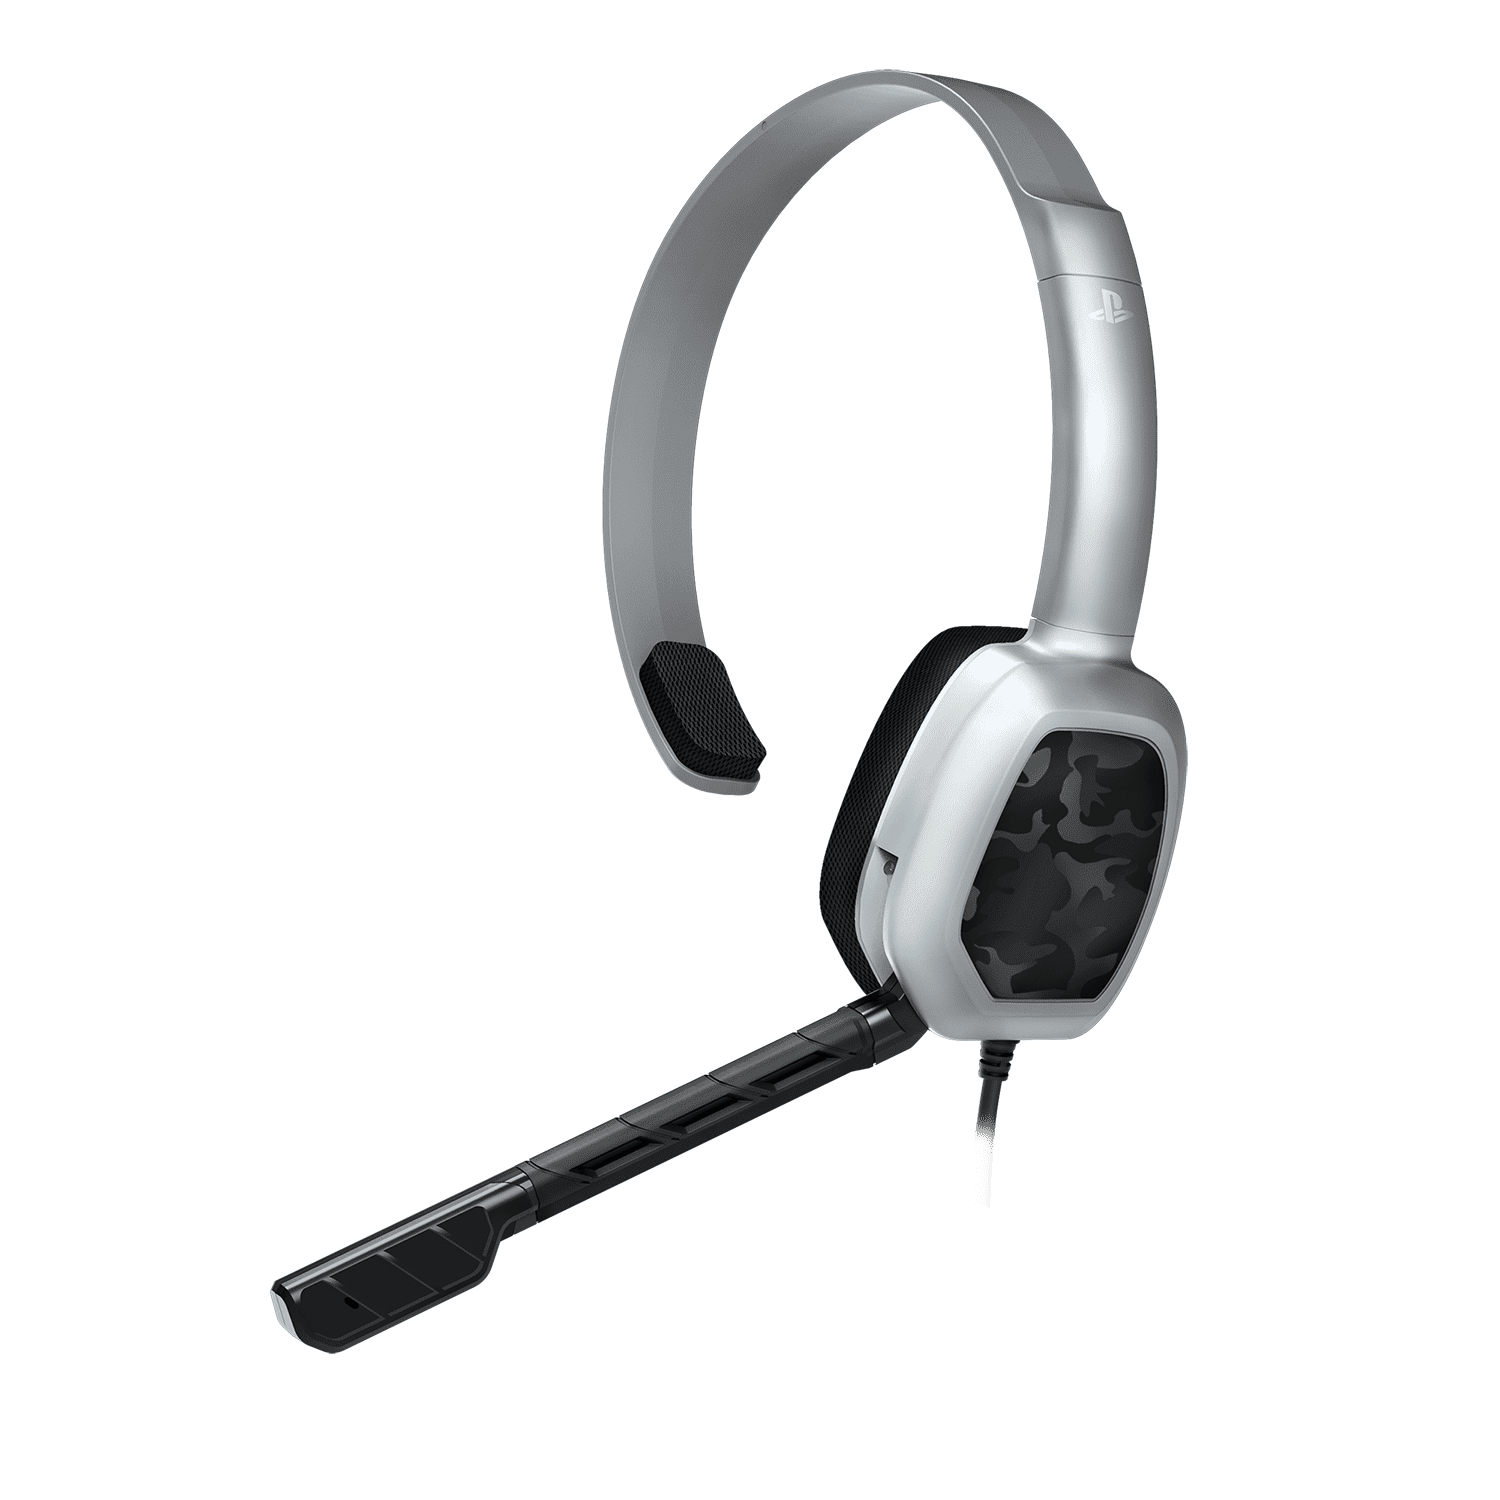 Cloud Chat Headset for PS4 – One Ear Cup, Reversible Design